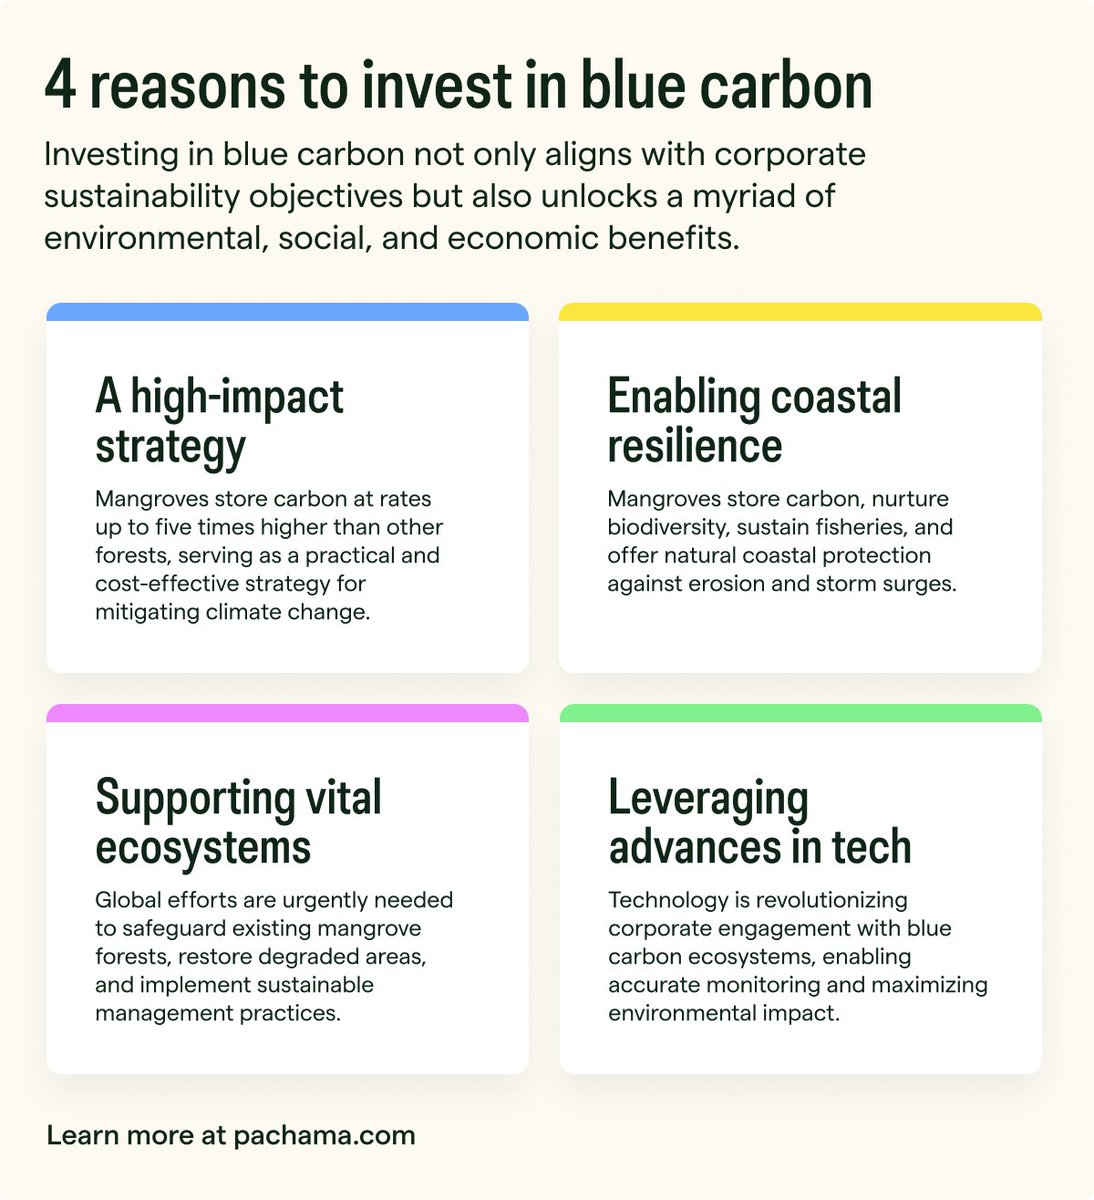 There’s a growing trend of corporate investment in blue carbon projects. Discover why these coastal ecosystems are gaining momentum as a cost-effective, long-term sustainability solution: pachama.com/blog/why-mangr… #Pachama #BlueCarbon